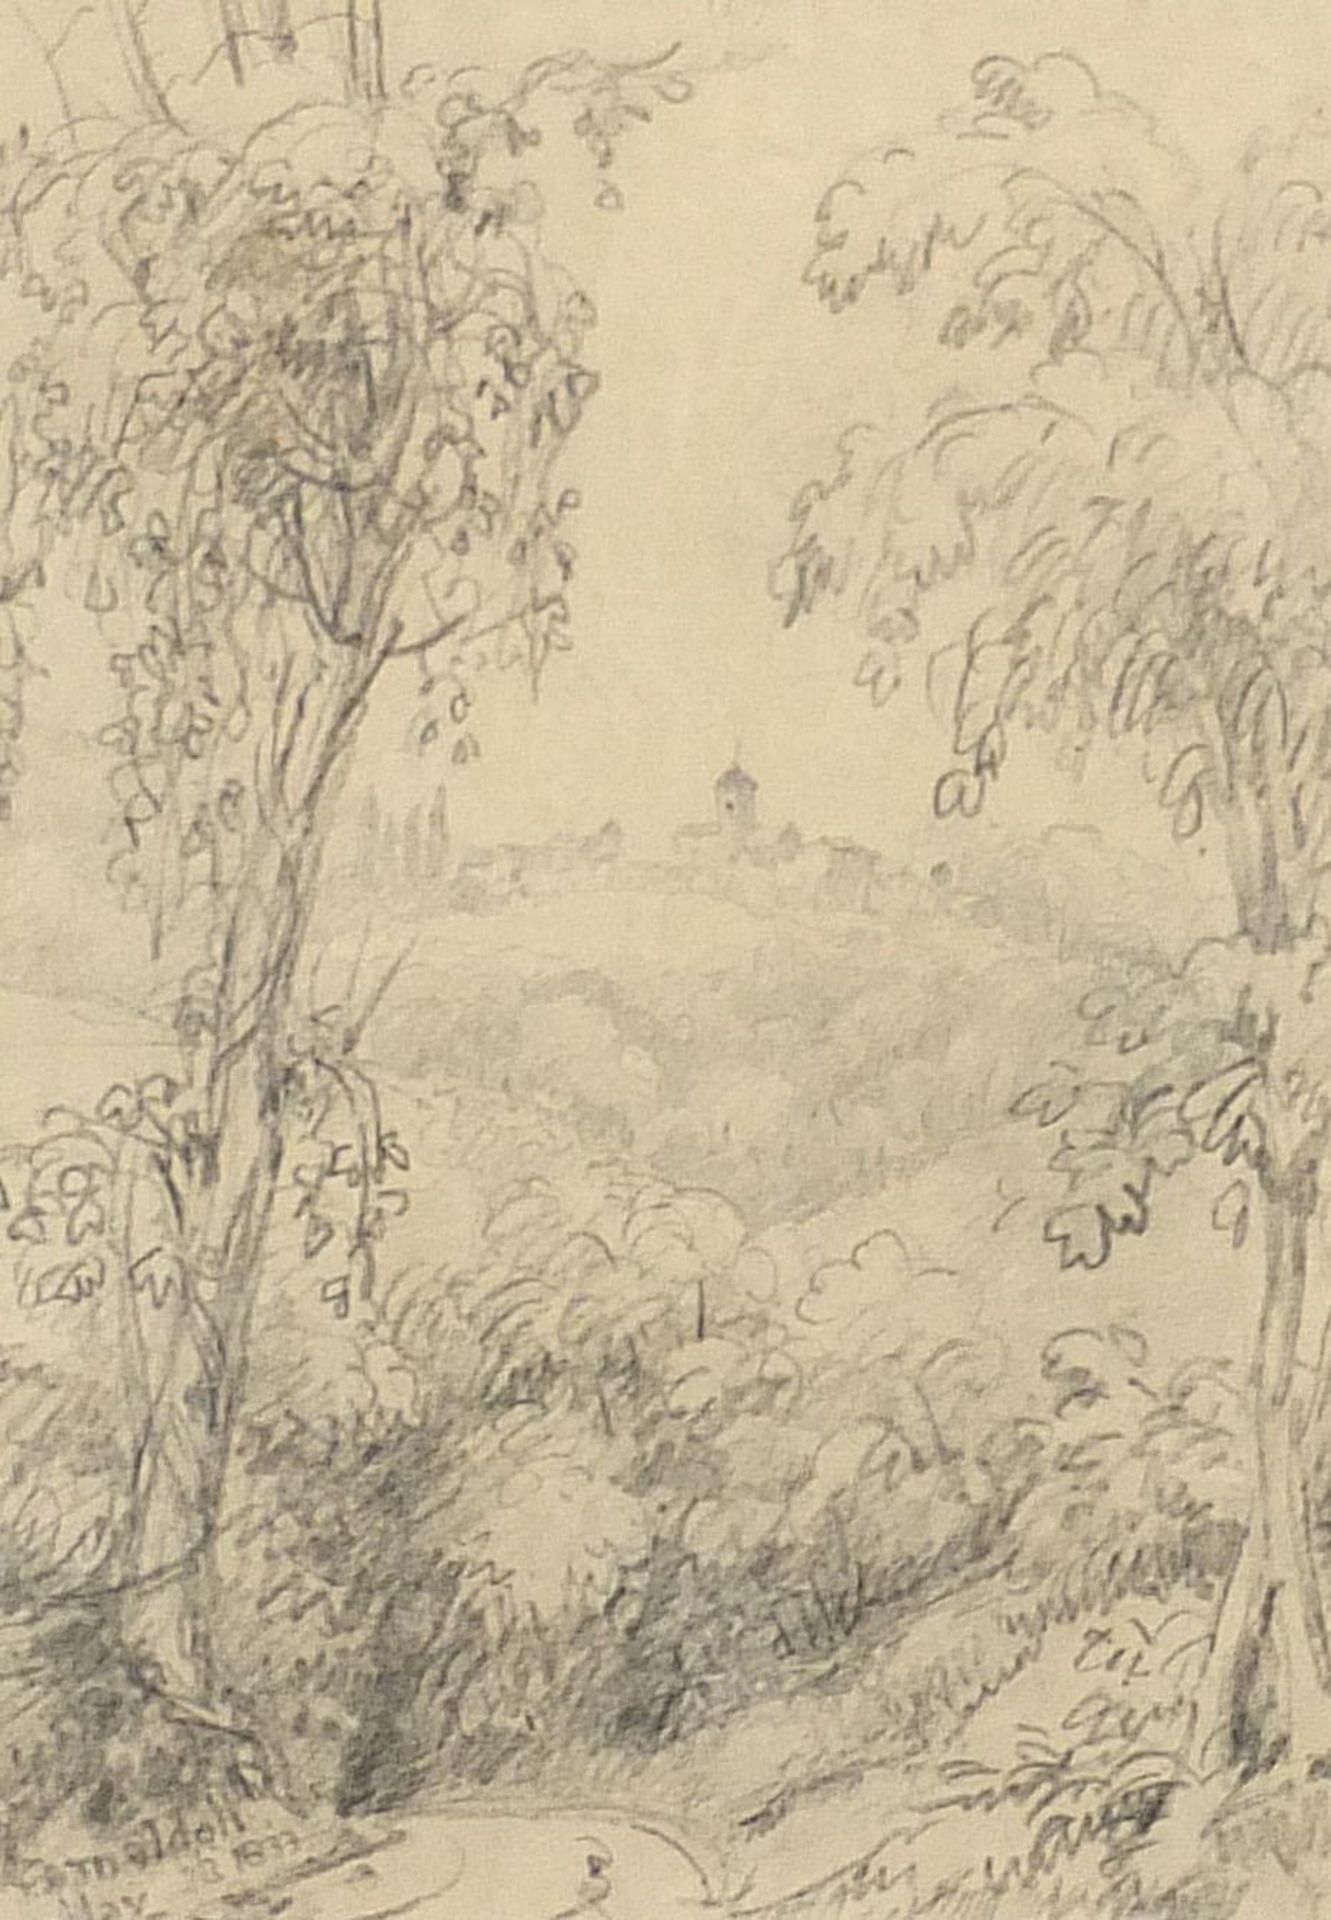 Lady Elizabeth Percy - Tuscan landscape, 19th century pencil sketch, Agnew Gallery label and details